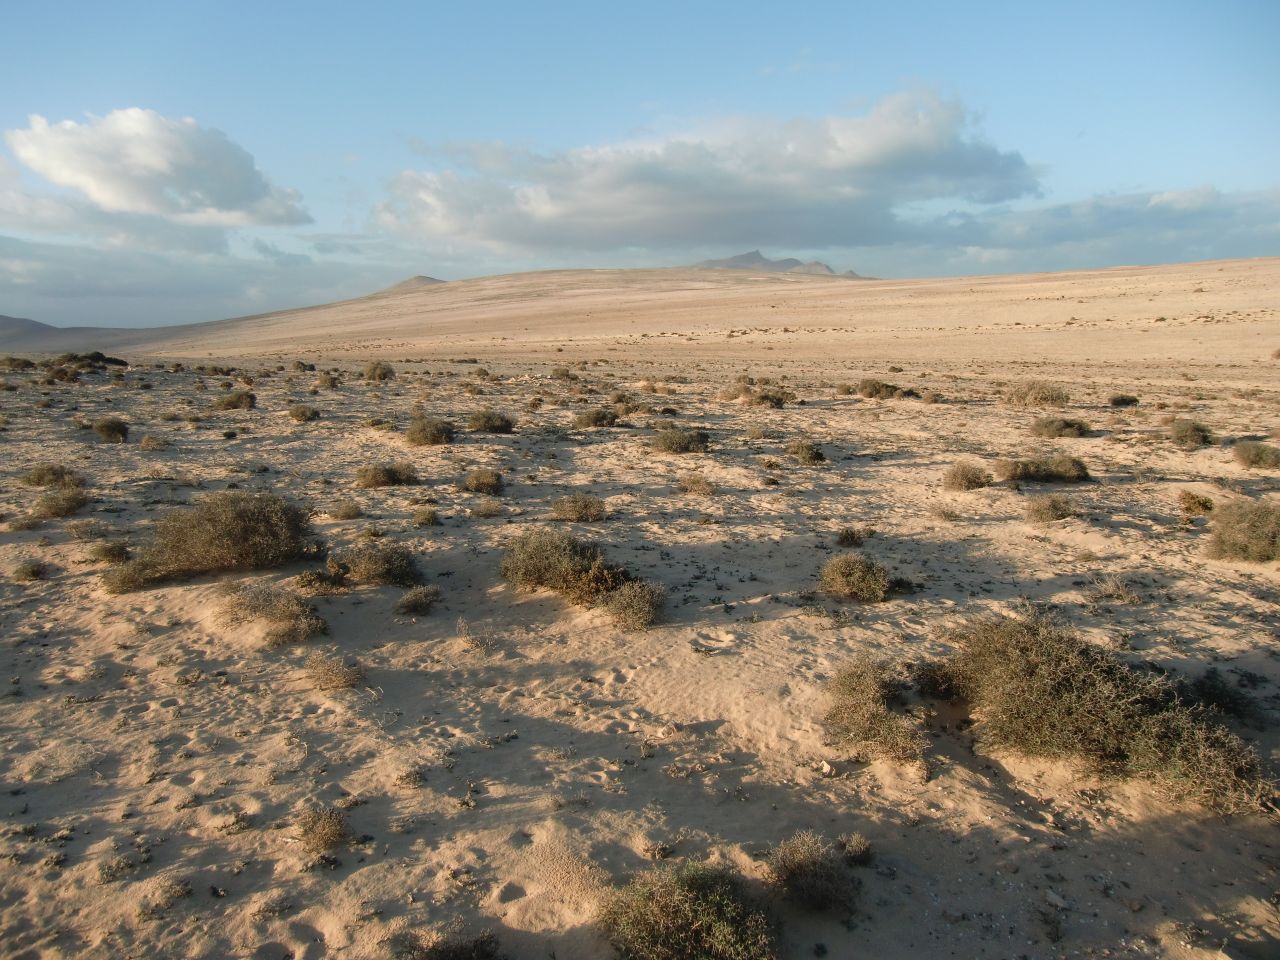 Markku Rainer Peltonen took this photo of Fuerteventura. He says climate change threatens the island's desert and semi-deserts, and adds: "Fuerteventura's ecosystem is sensitive because of erosion, too. The island's fast-growing tourism may also leave negative traces with regards to its unique landscape, fauna and flora."